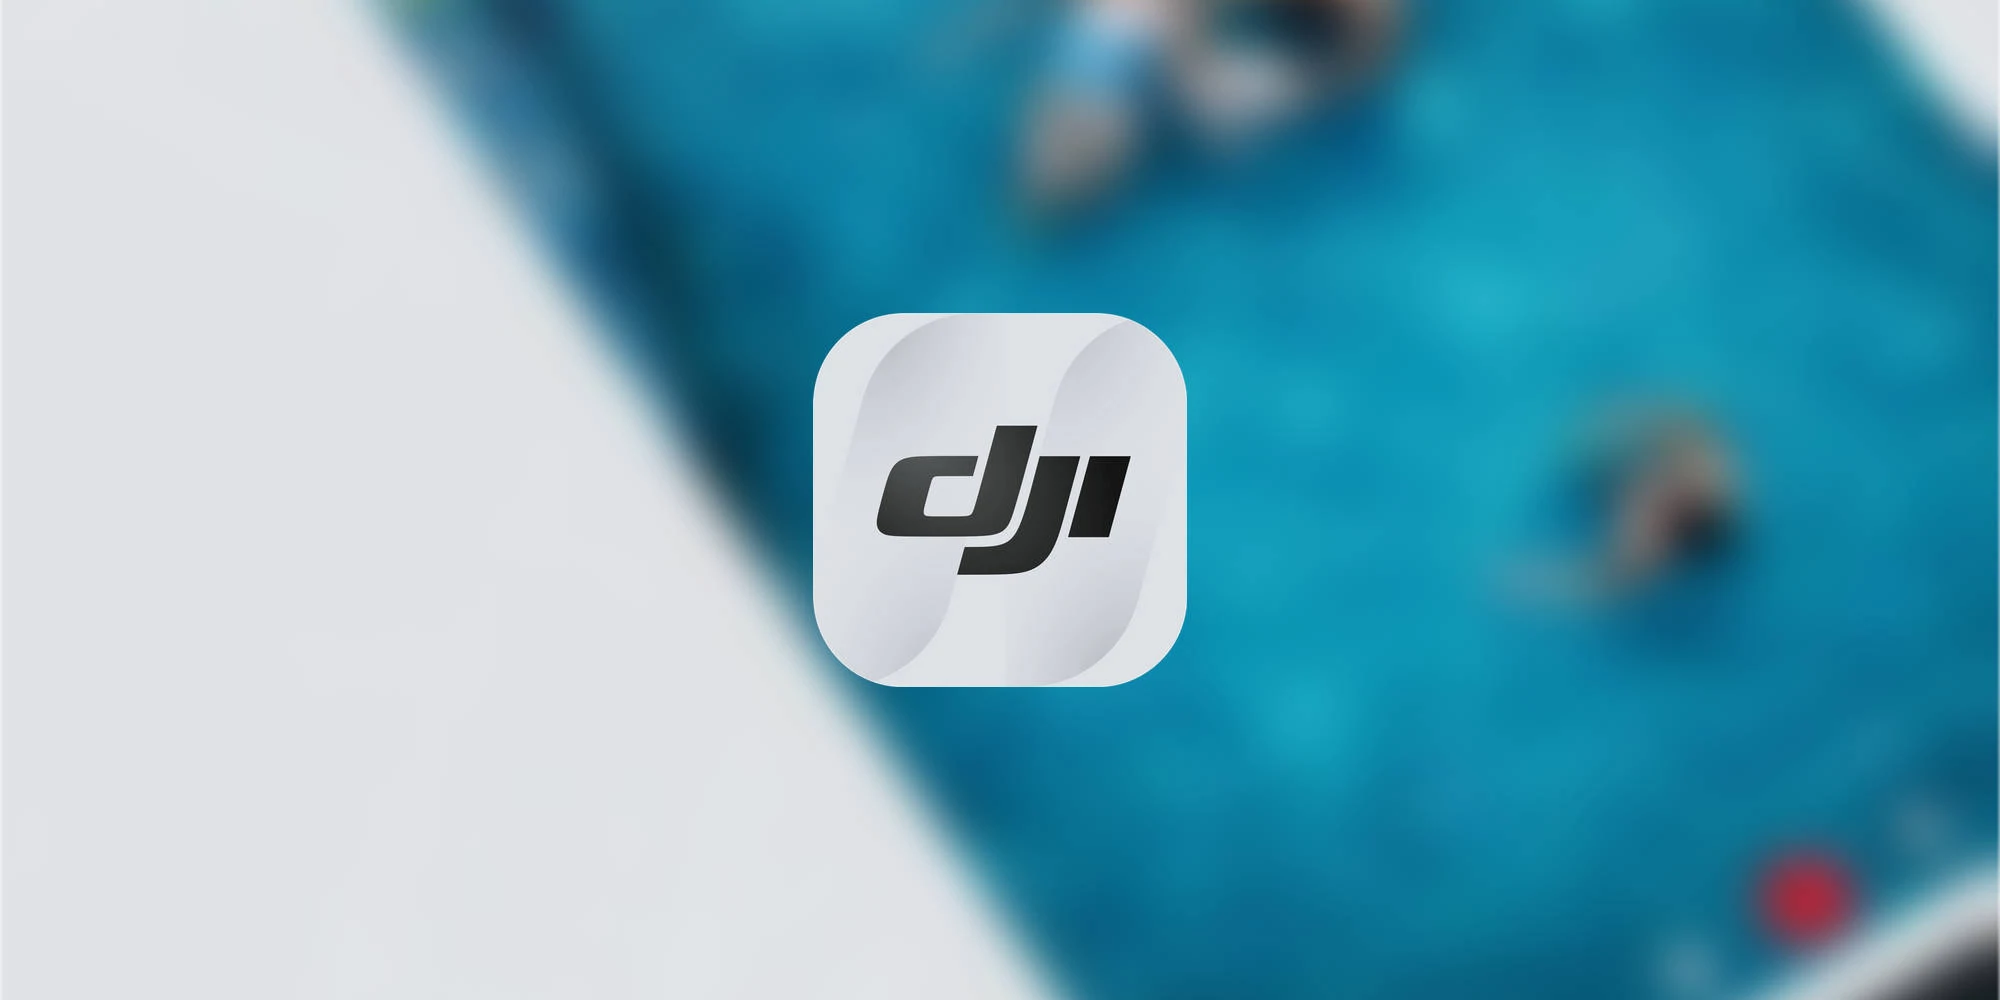 DJI Fly App — Download, Install and Learn to Control Drones